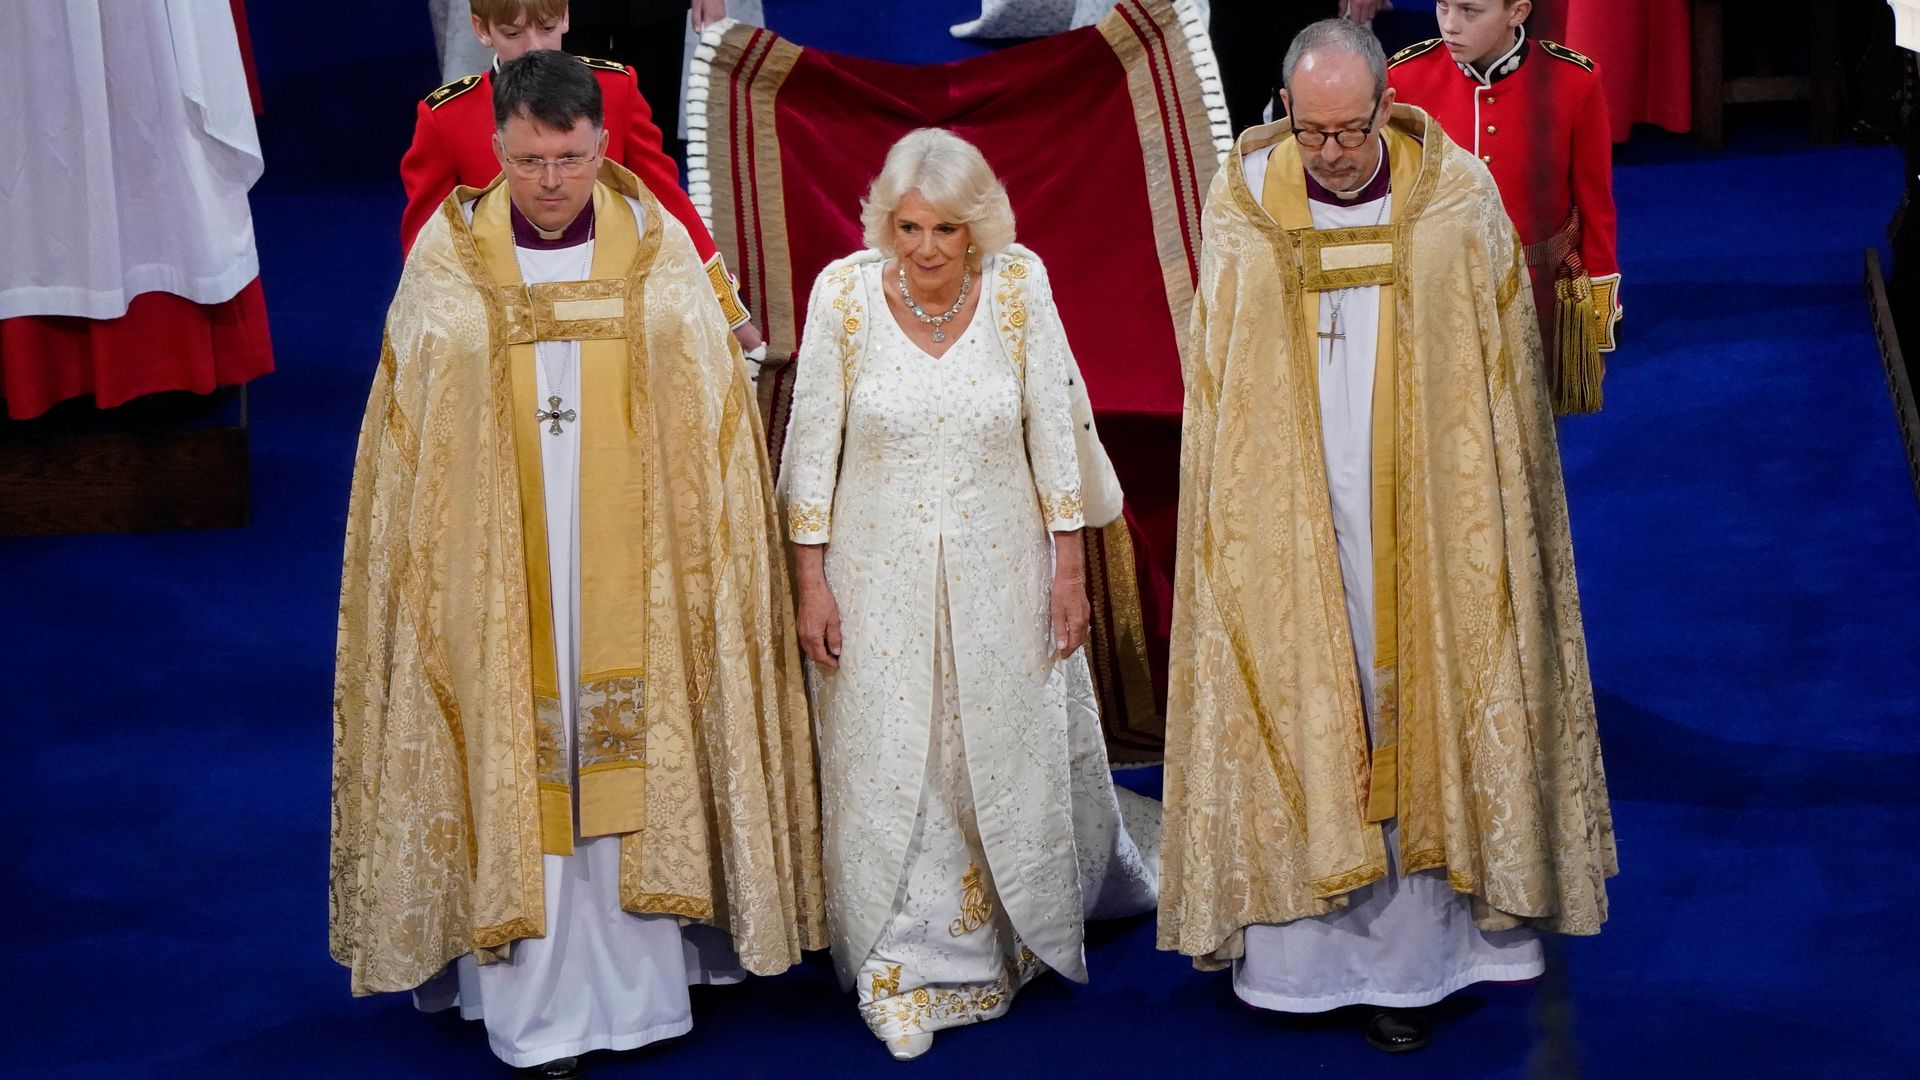 The Queen wore a gown designed by Bruce Oldfield